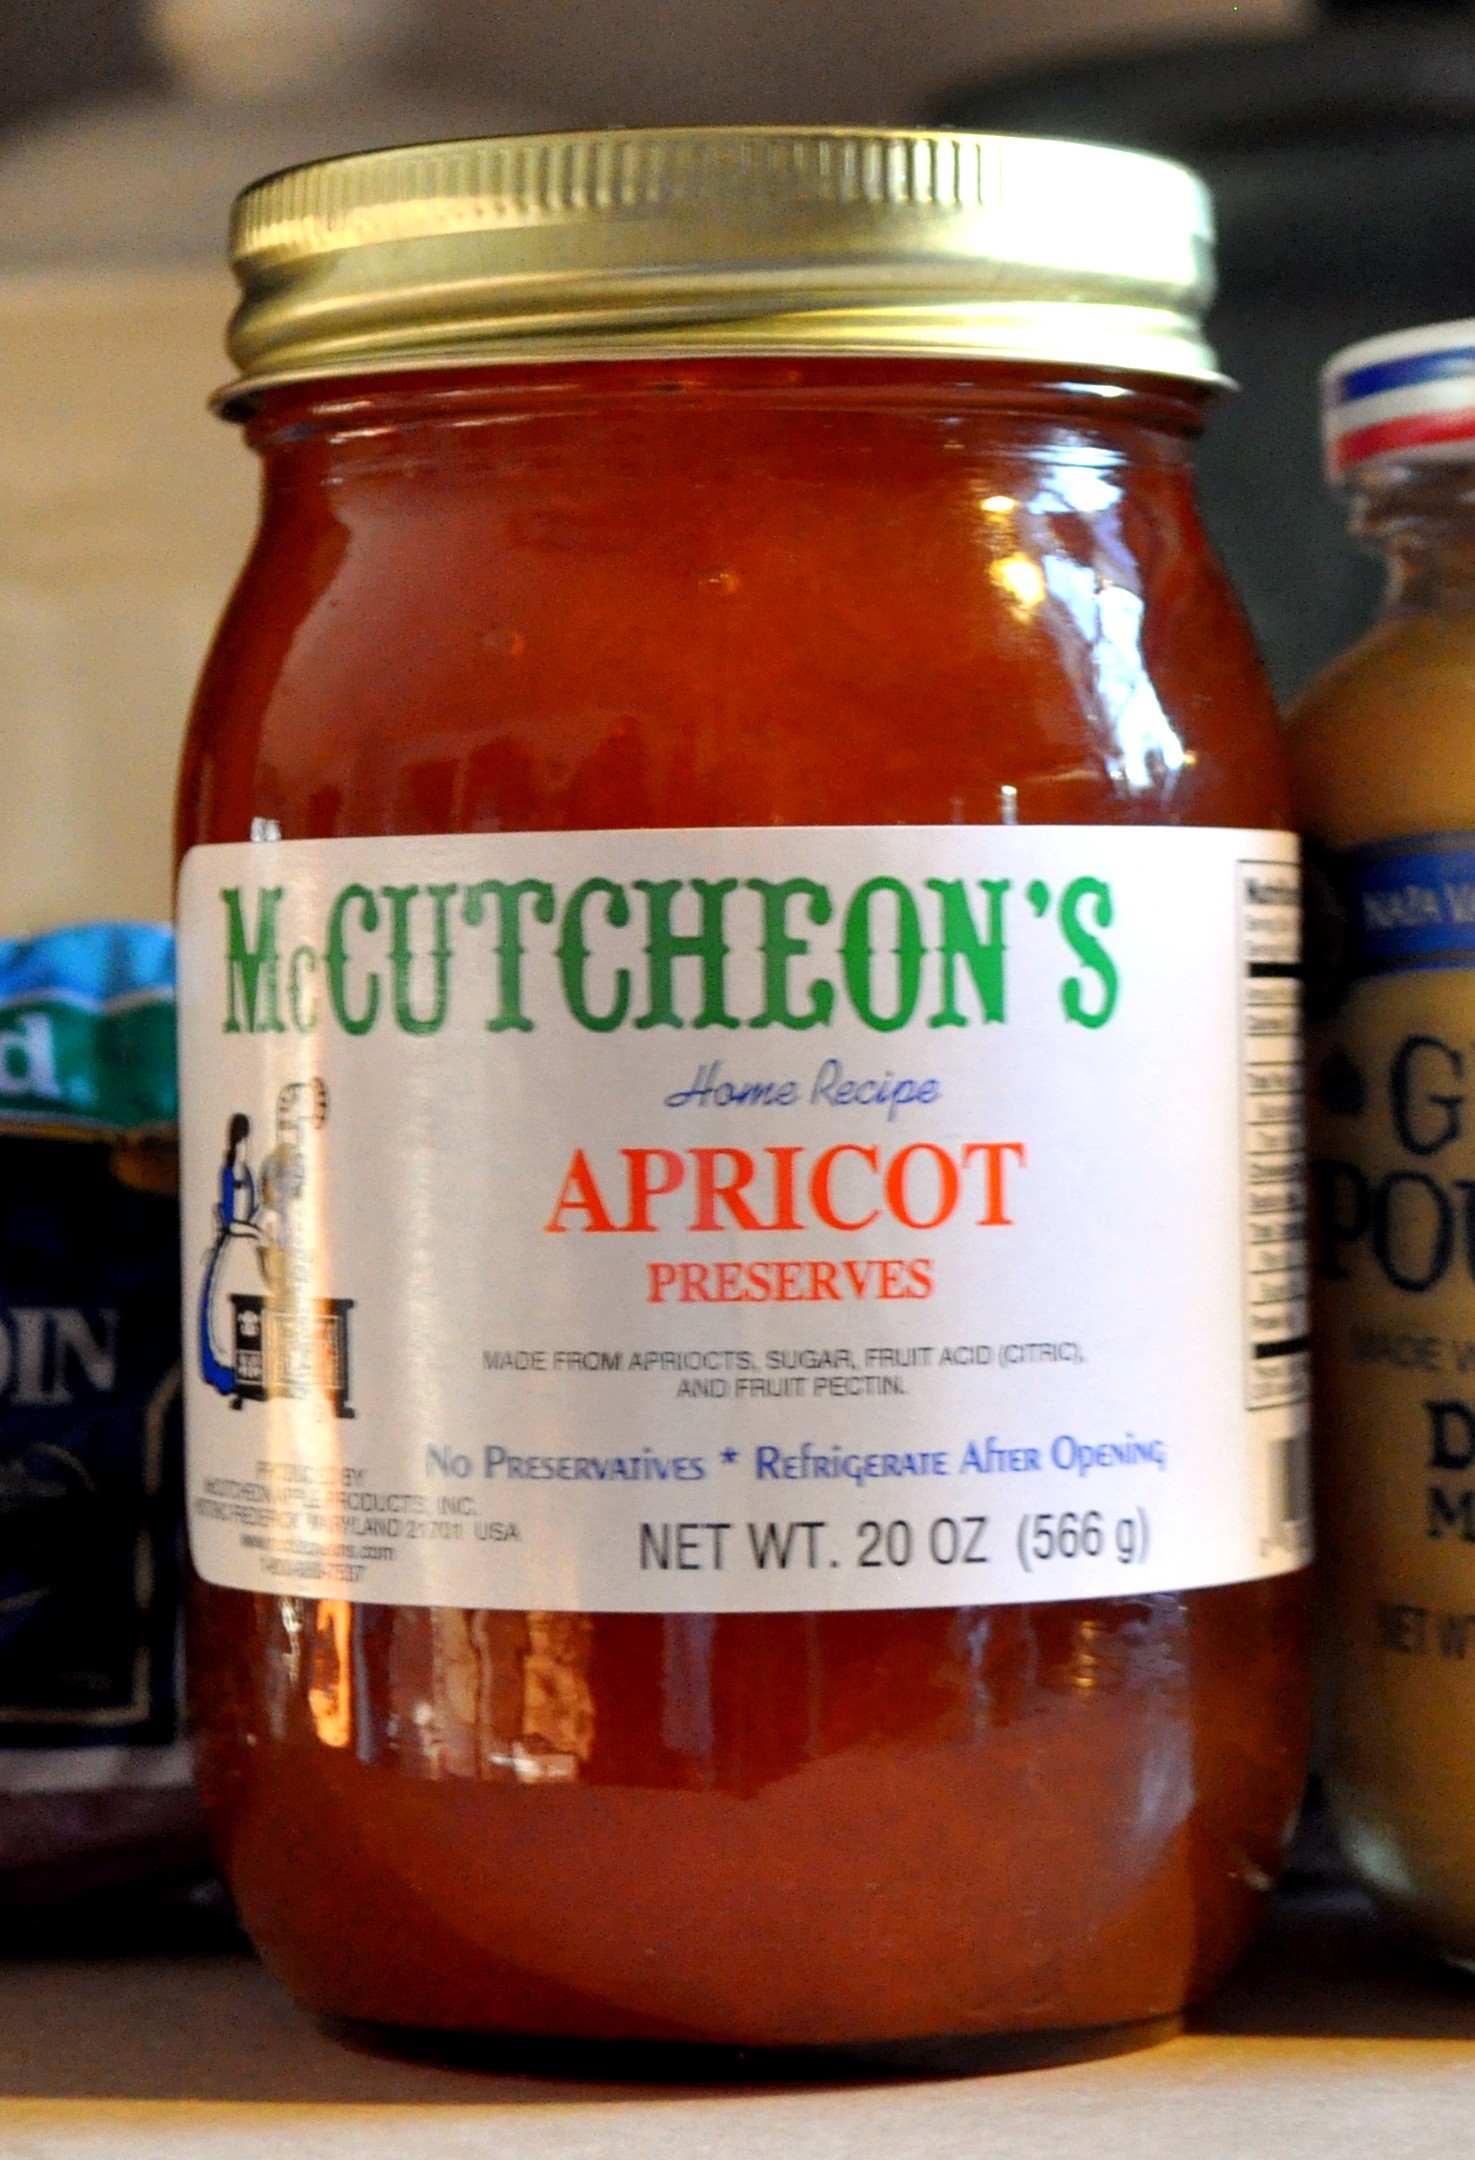 20oz Jar of Apricot Preserves from McCutcheon's